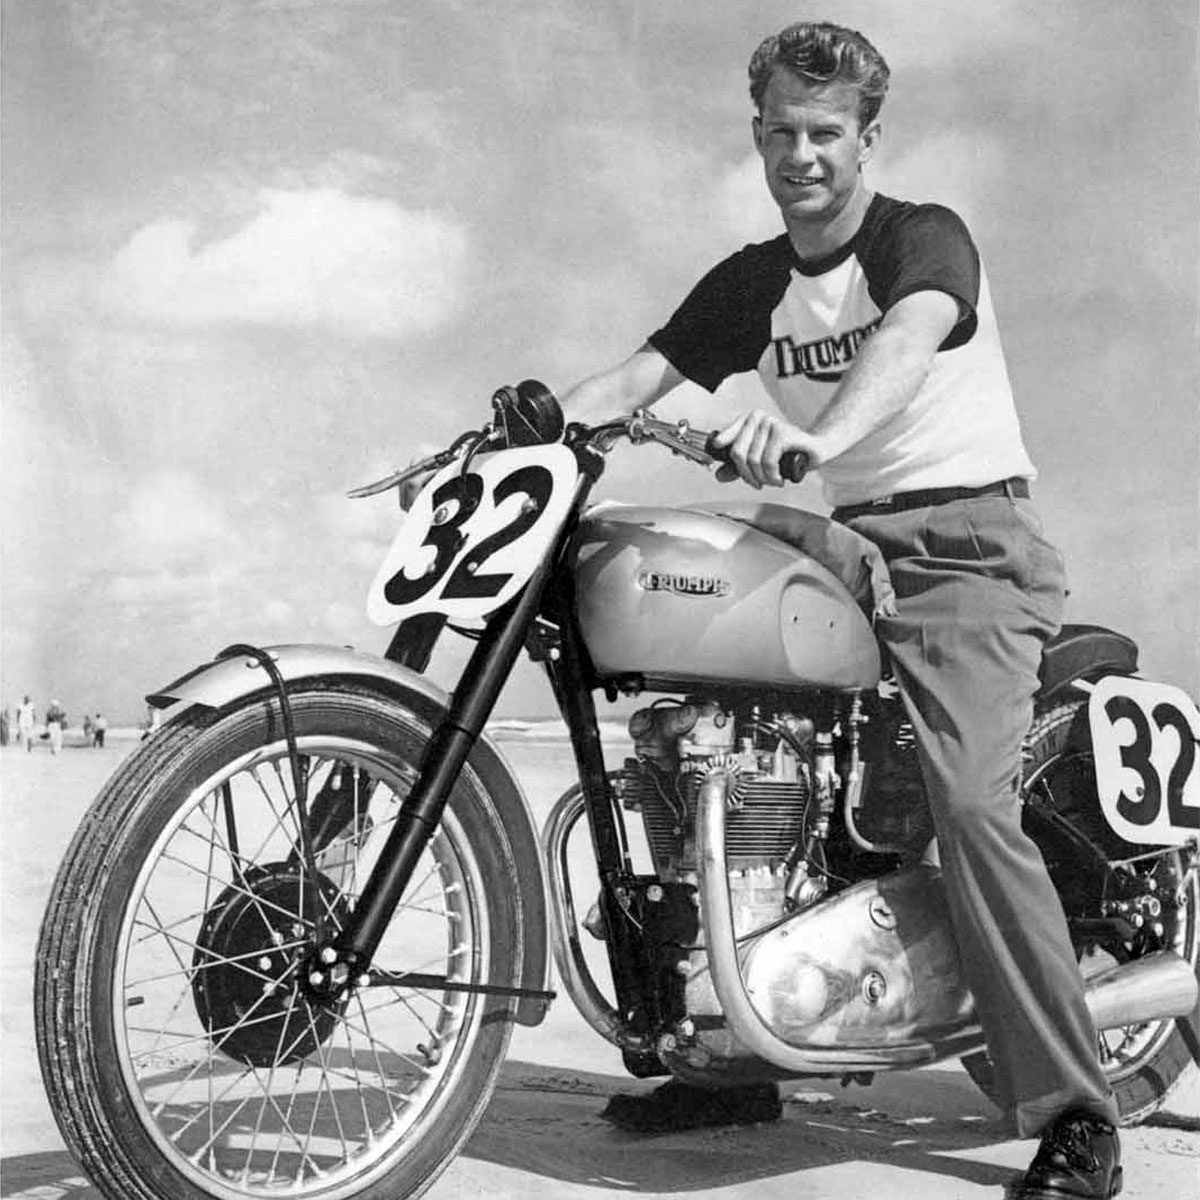 Givens founder, Gerald Givens, on a motorcycle